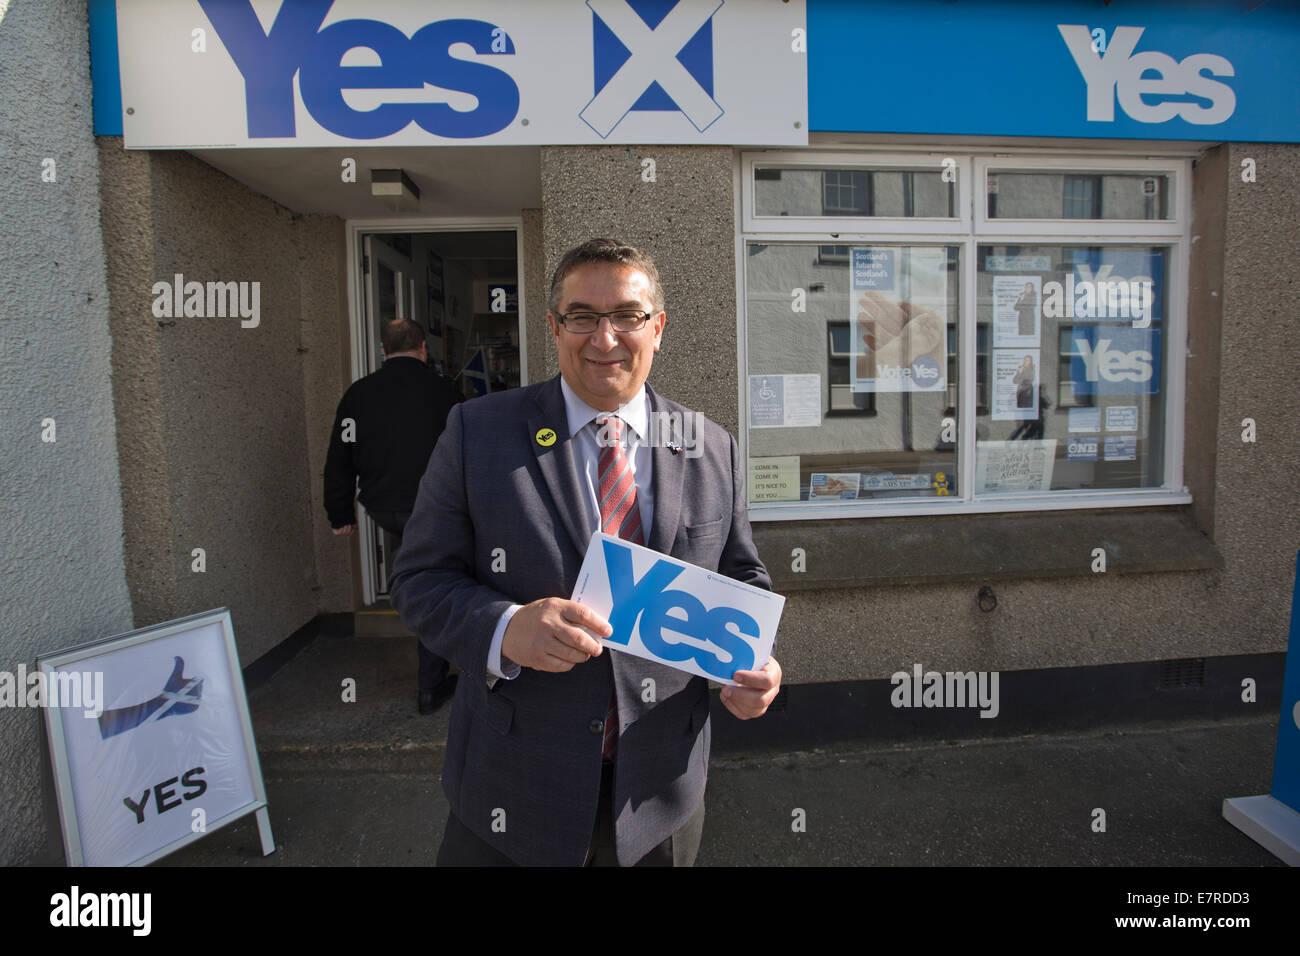 French-born Christian Allard, a member of the Scottish parliament for the country's North East region, pictured at a pro-indepen Stock Photo